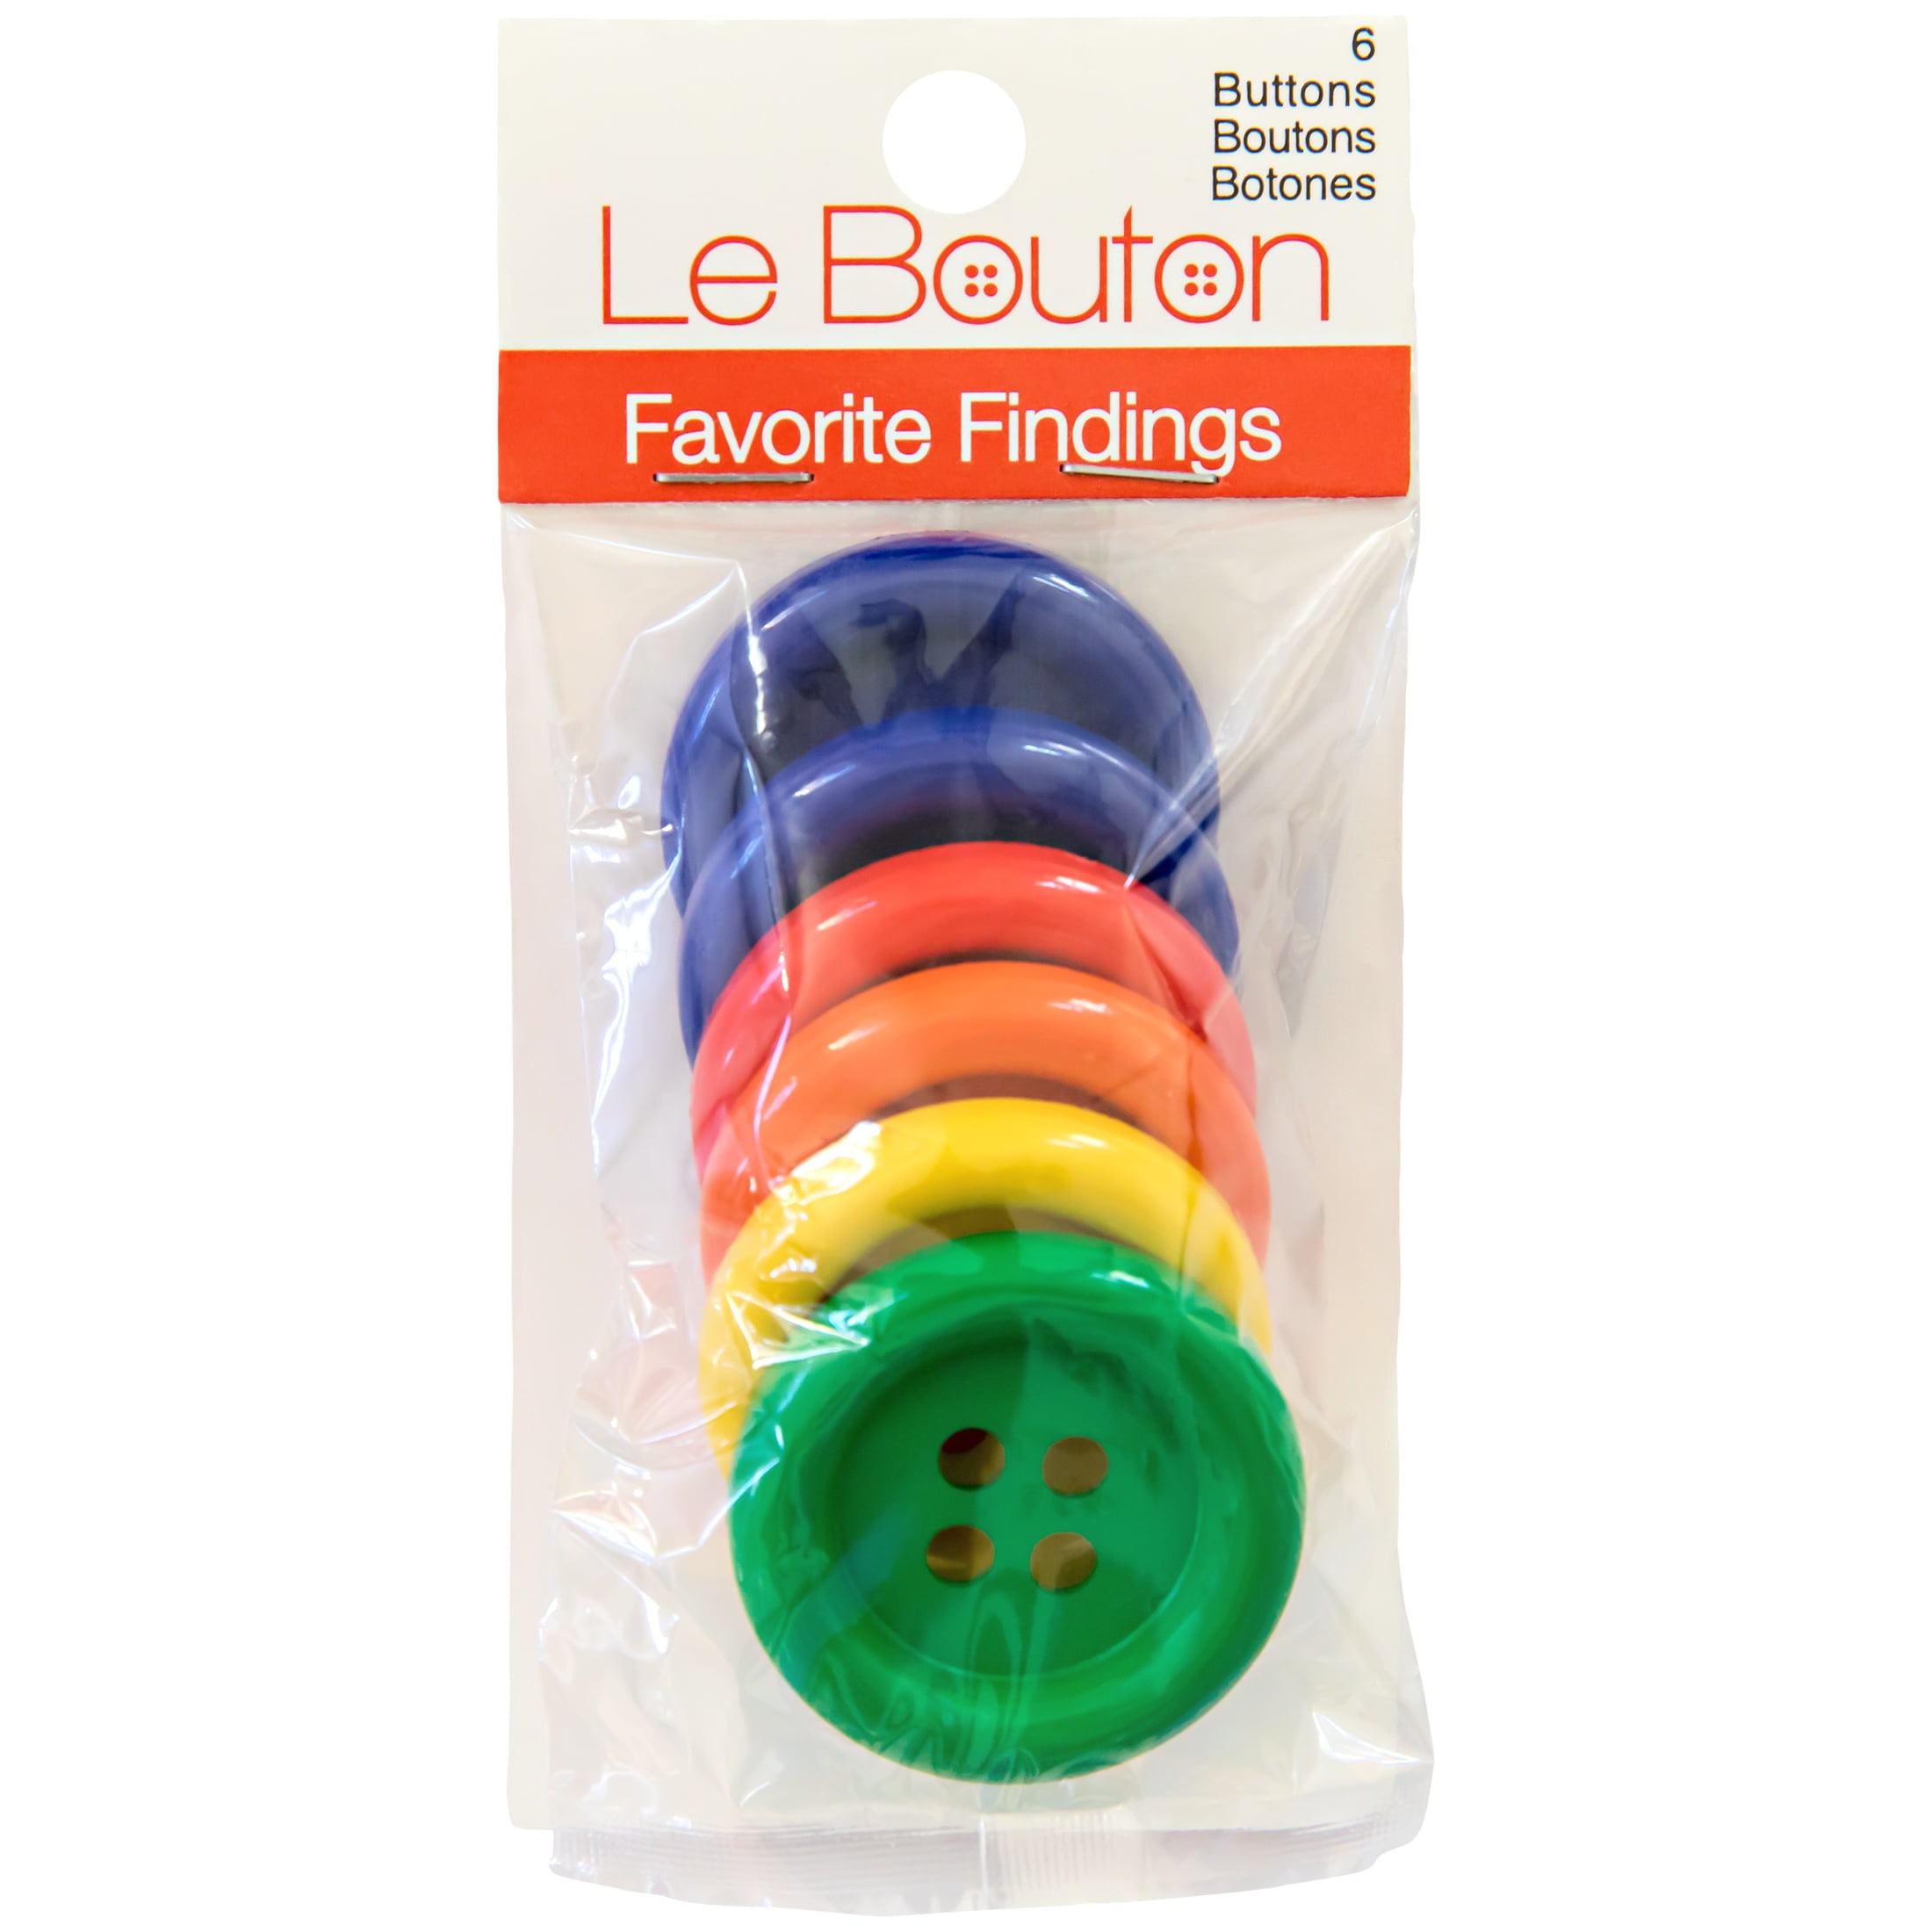 Favorite Findings Primary 1 3/8 4-Hole Big Buttons, 6 Pieces